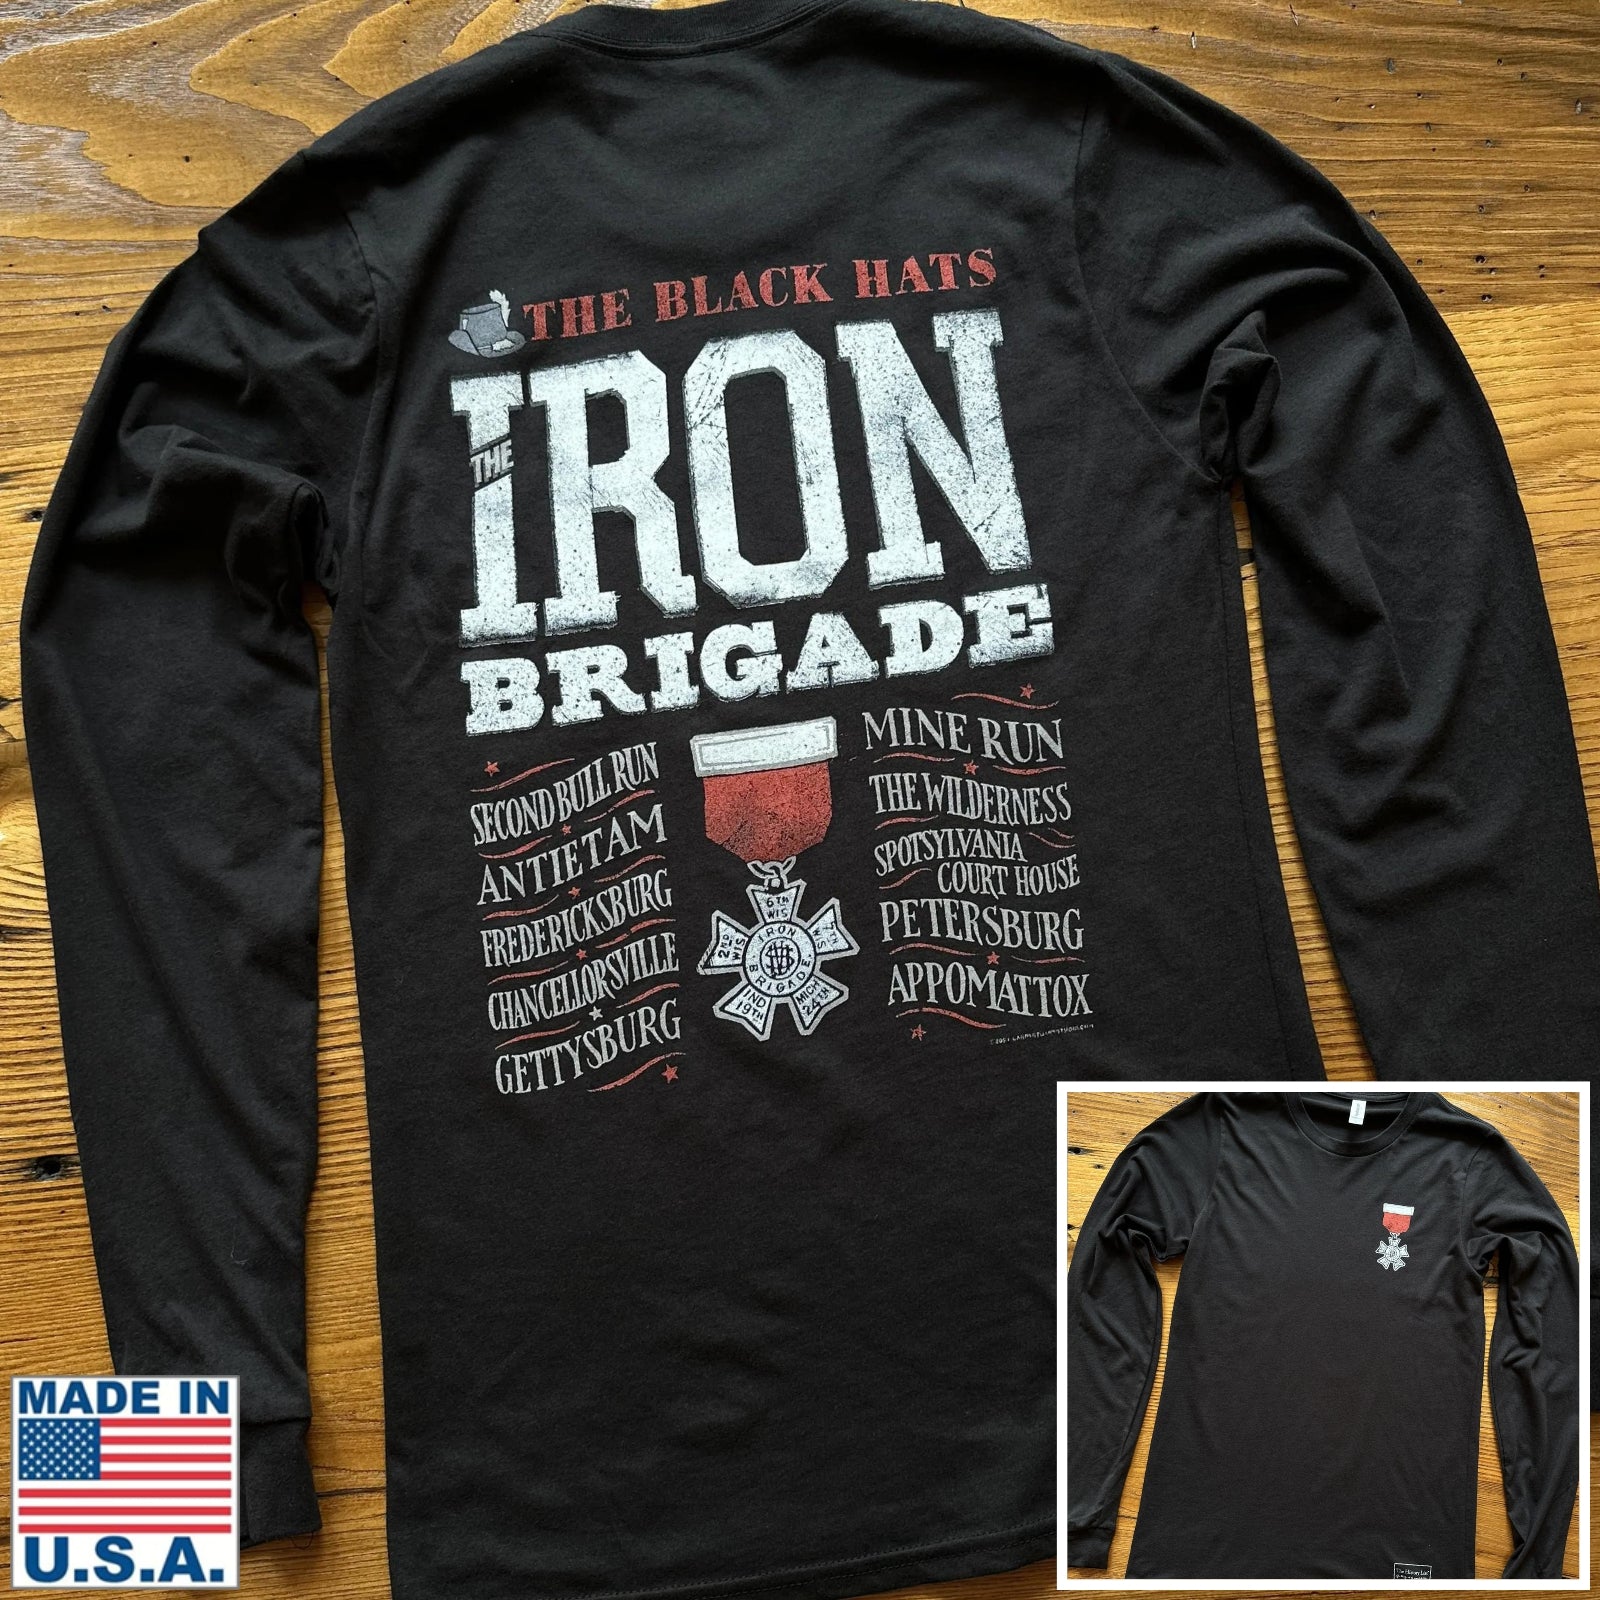 The Civil War "Iron Brigade" Long-Sleeved Shirt Made in America from The History List store